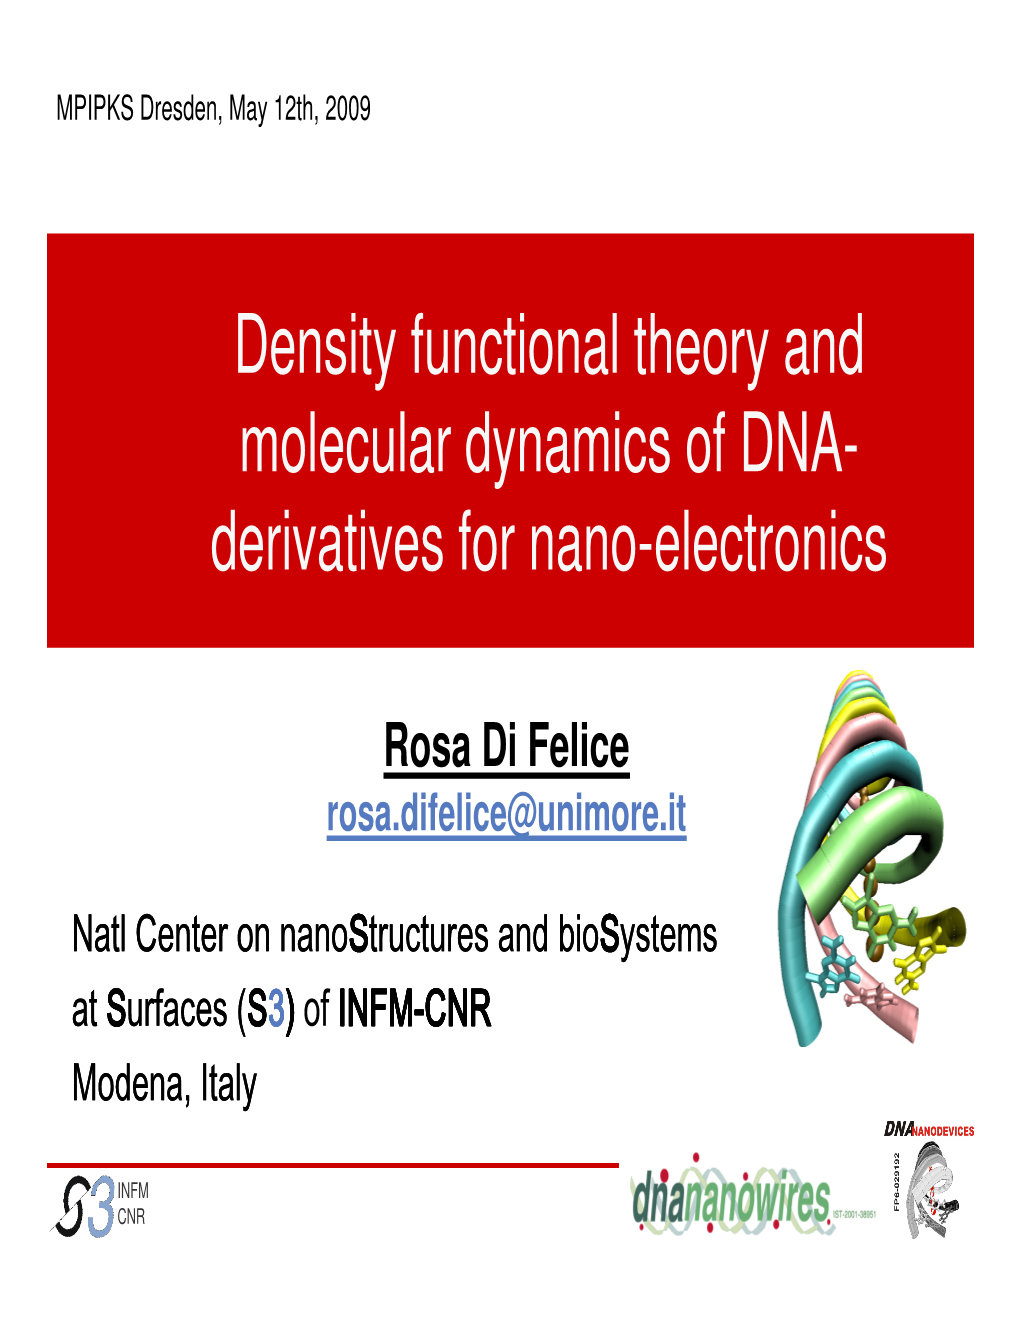 Density Functional Theory and Molecular Dynamics of DNA- Derivatives for Nano-Electronics